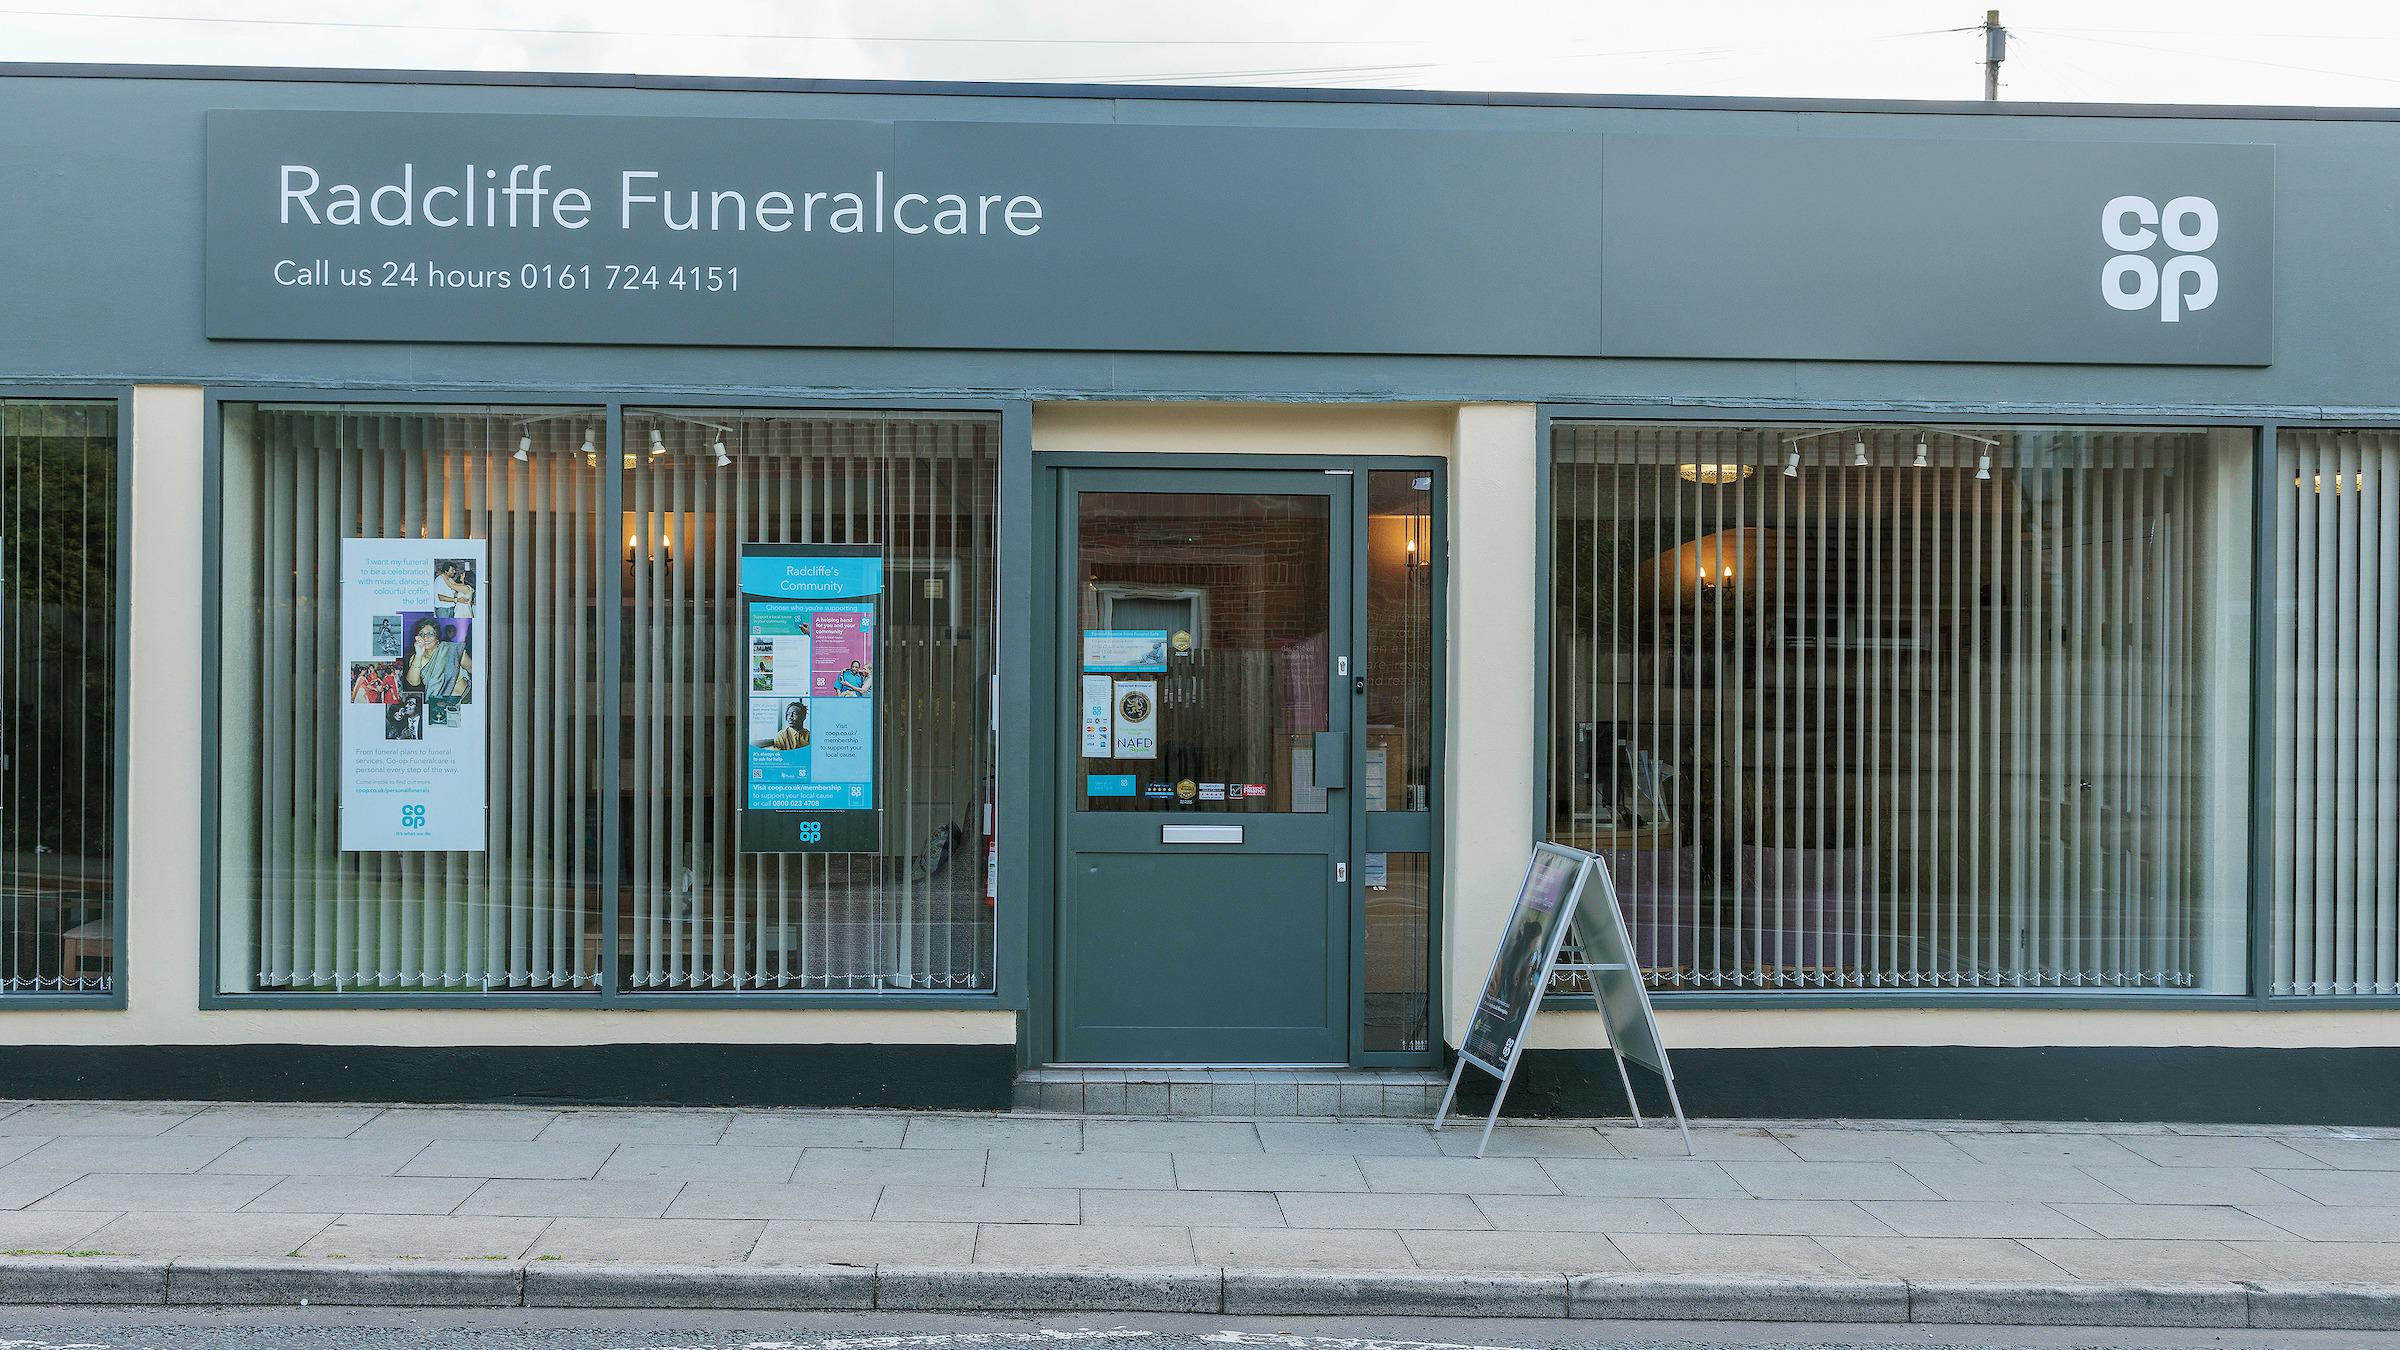 Images Co-op Funeralcare, Radcliffe